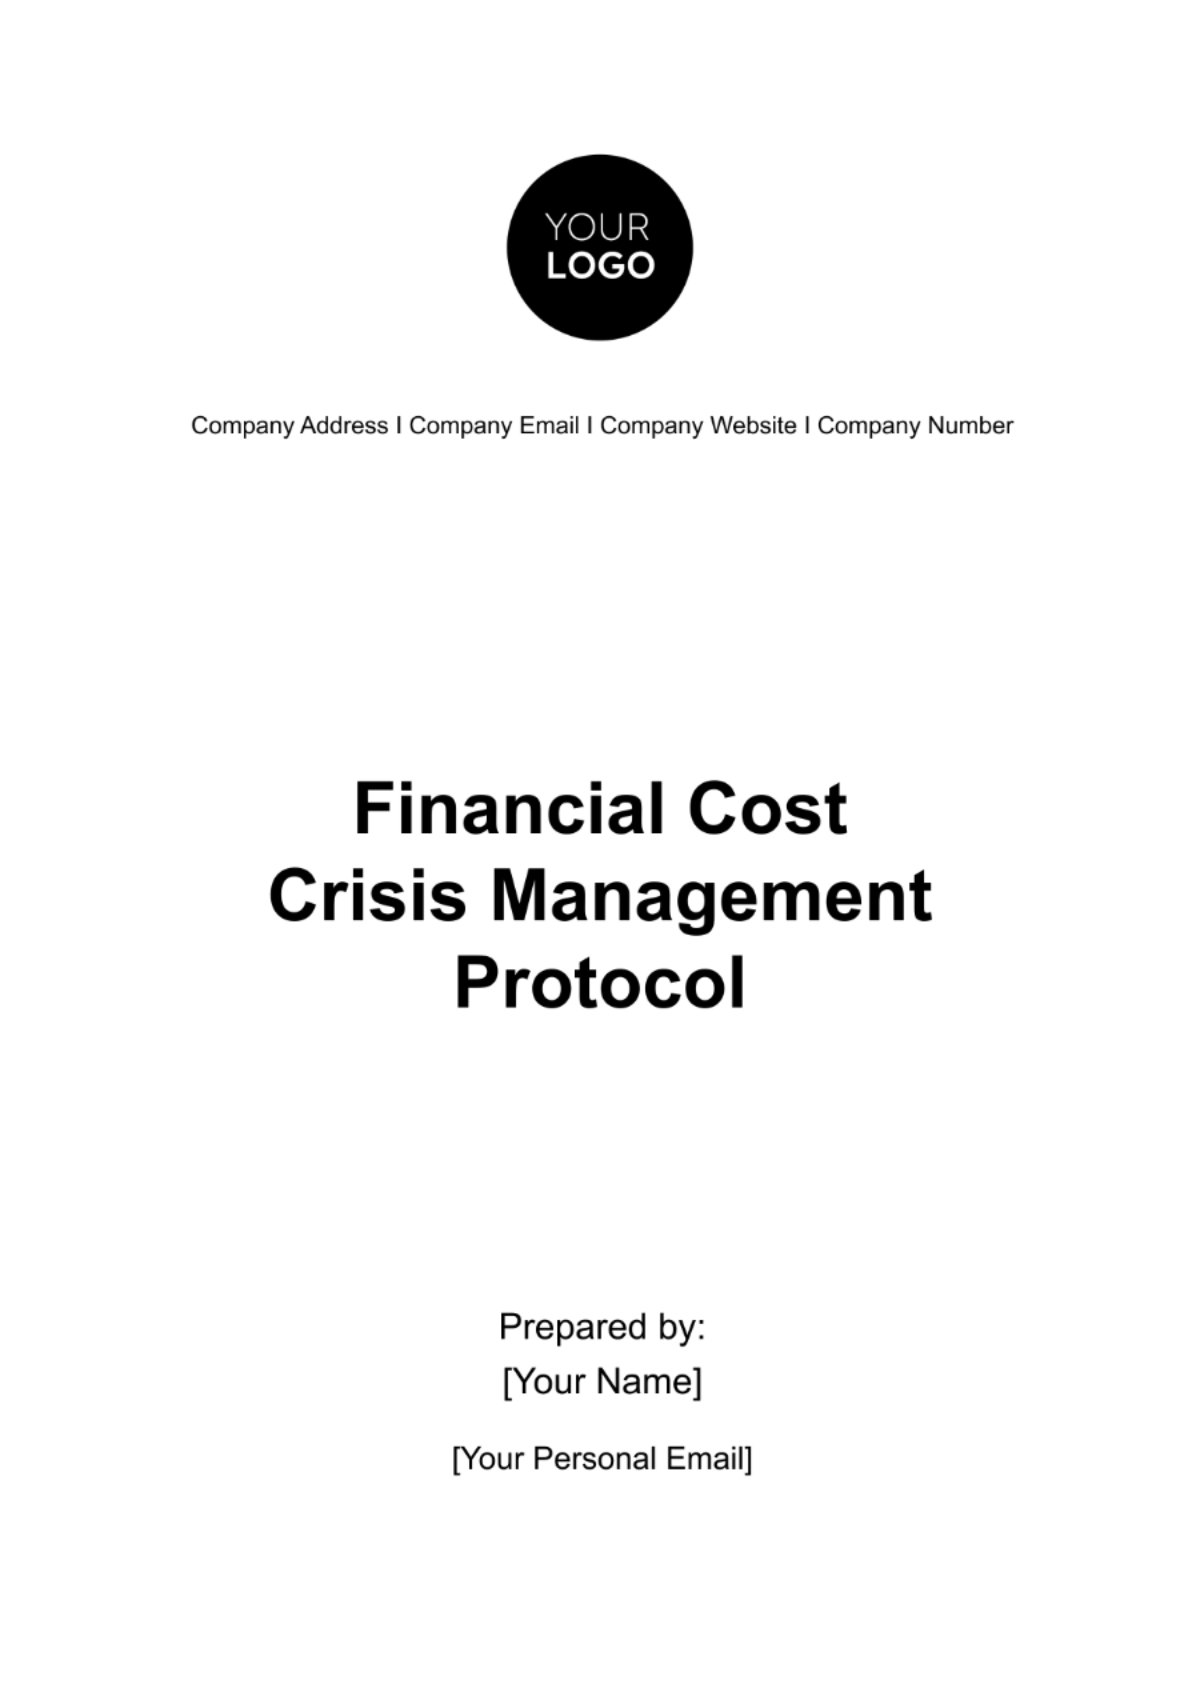 Financial Cost Crisis Management Protocol Template